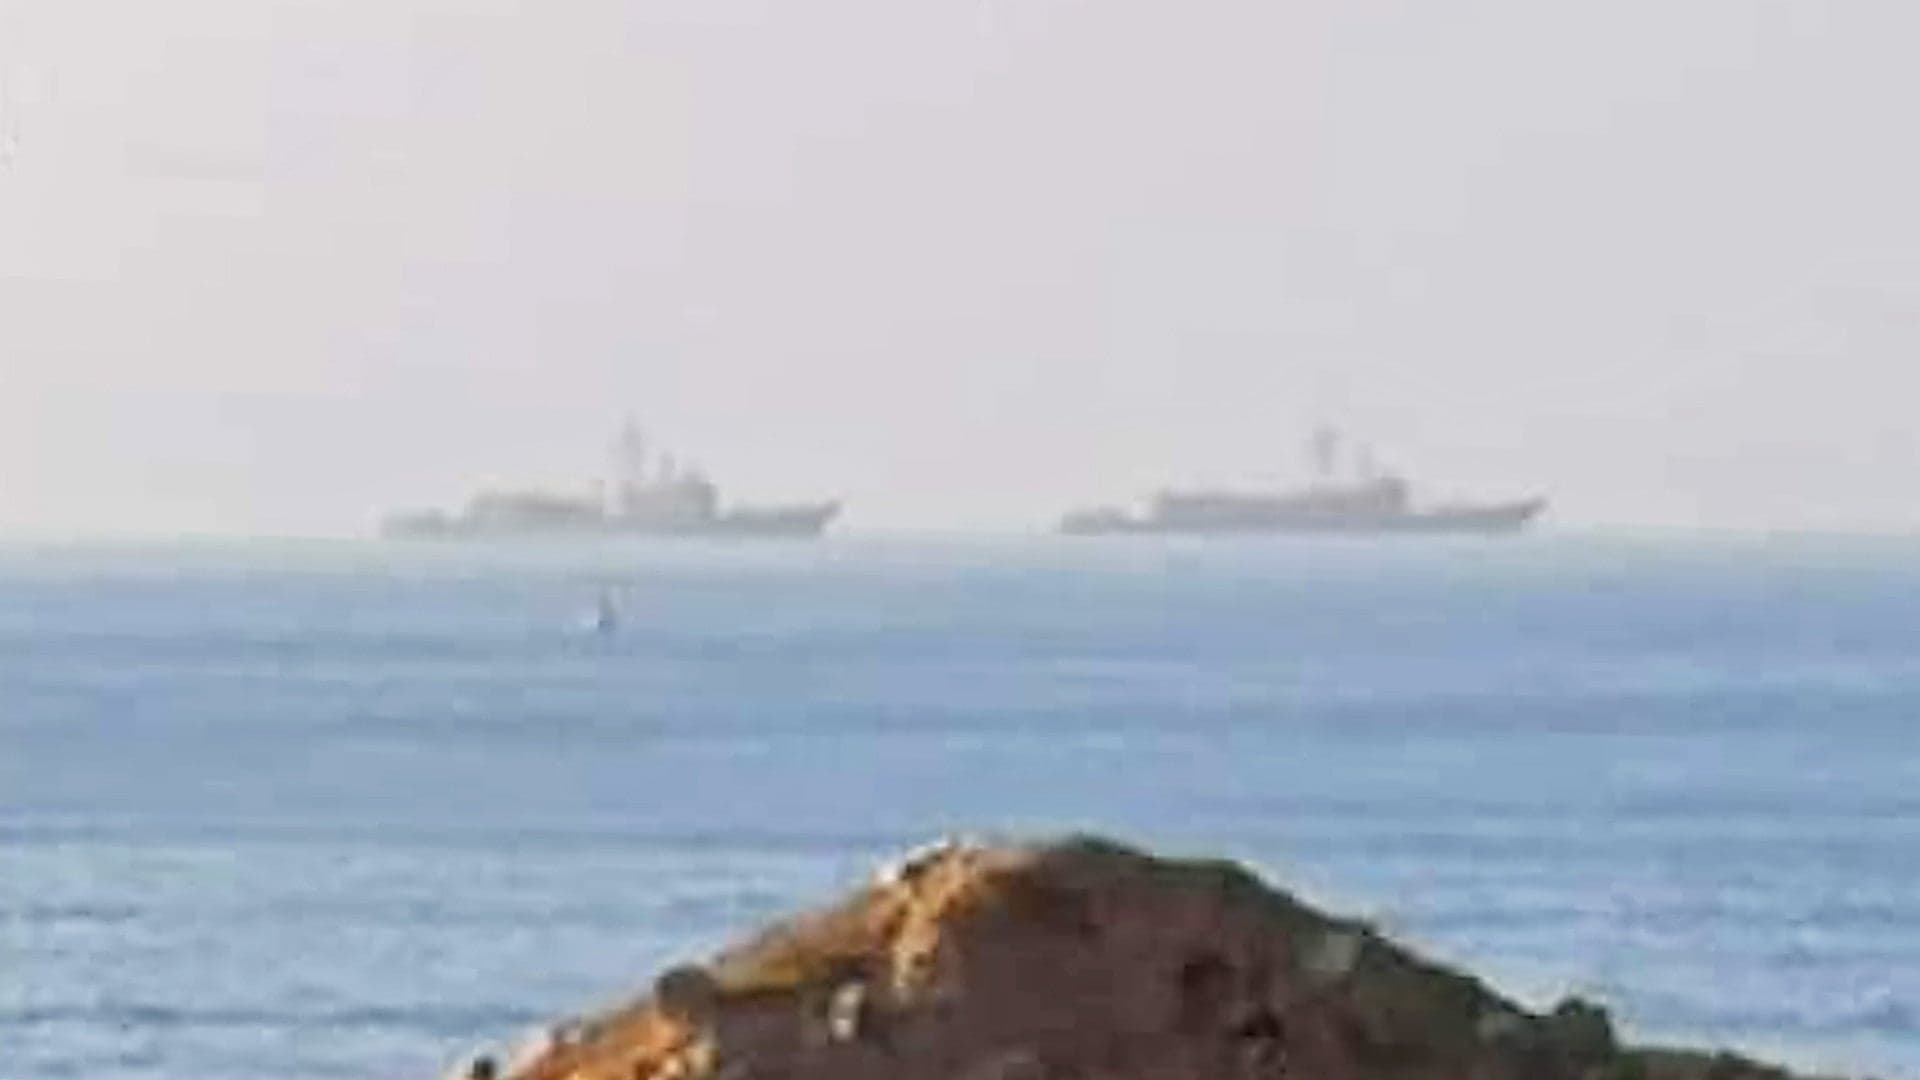 Two Turkish Frigates Appear Off Libya Amid Reports Of Troops And Armor Landing Ashore